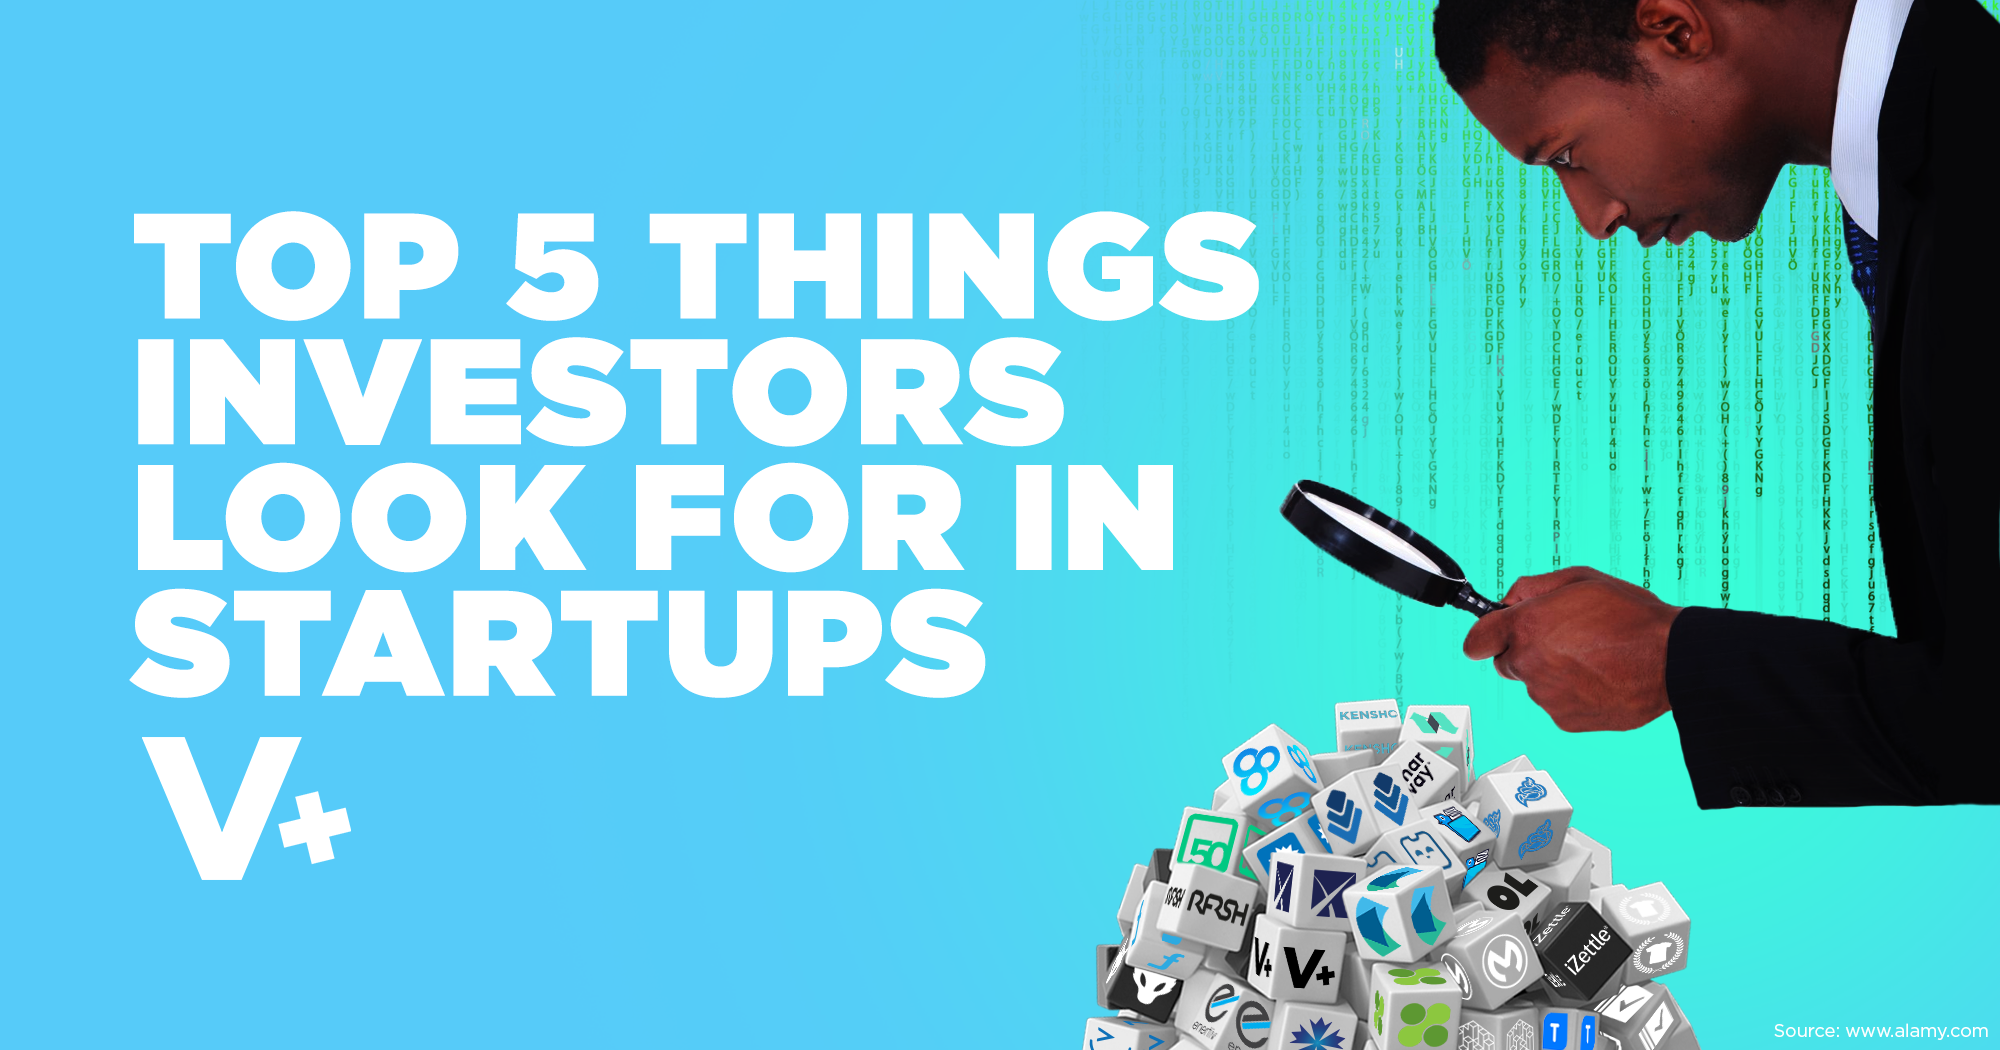 The Top 5 Things Investors Look for in Startups